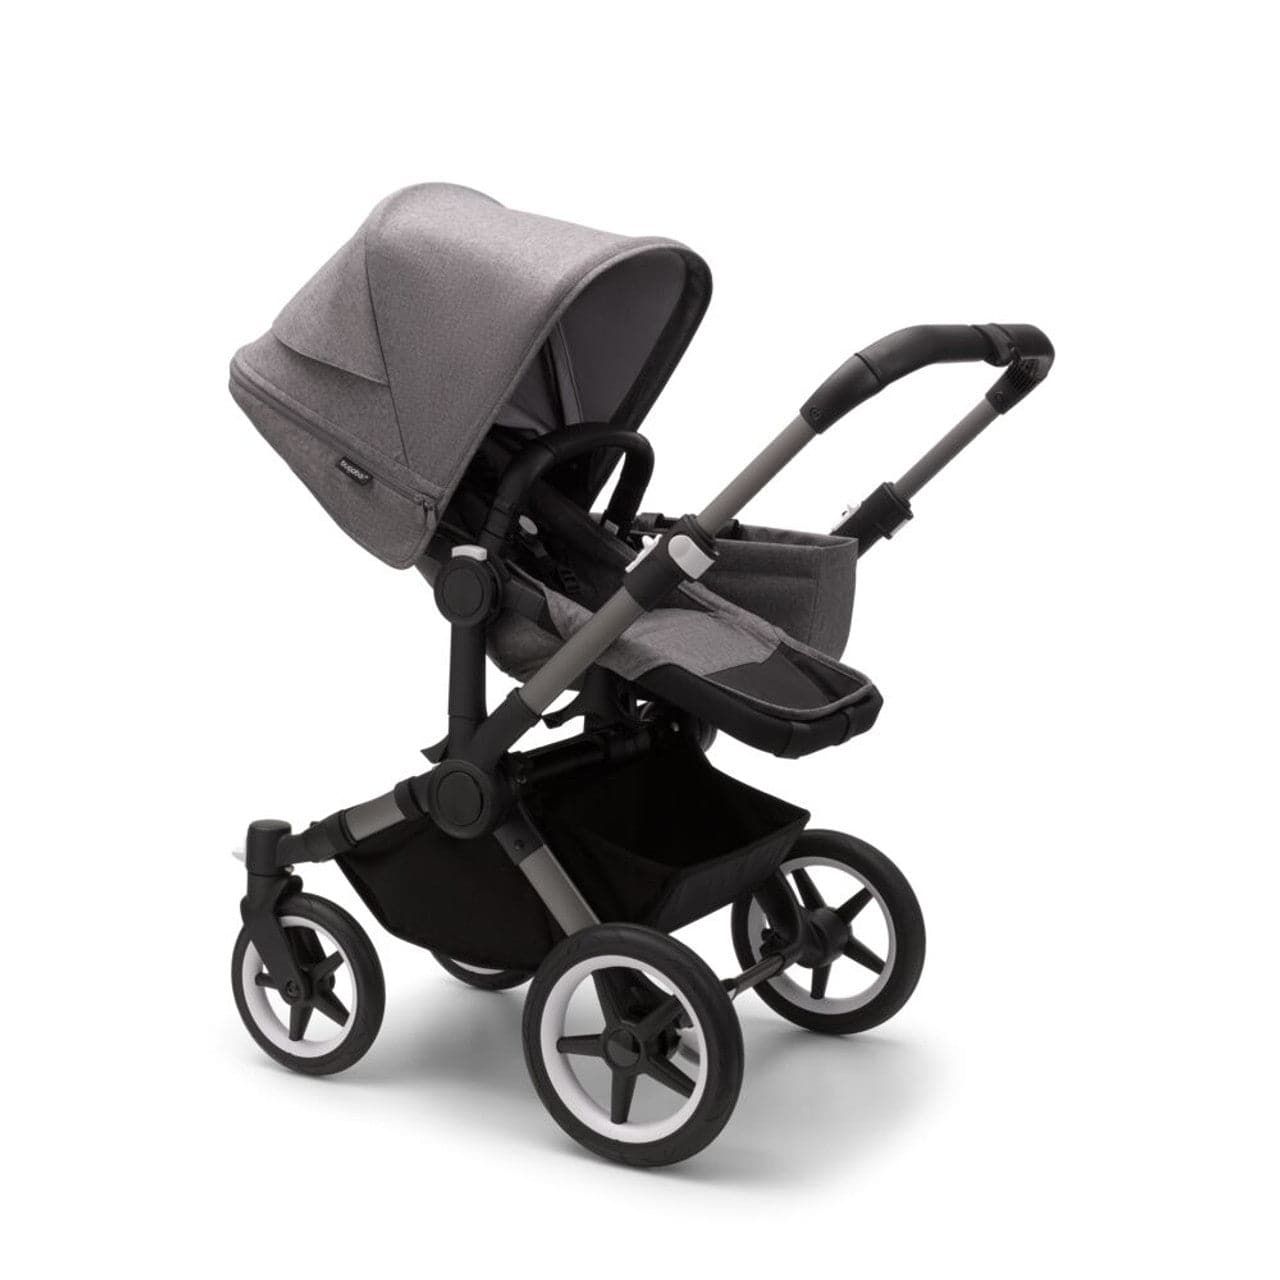 Bugaboo Donkey 5 Duo Pushchair Complete - Graphite/Grey Melange - For Your Little One